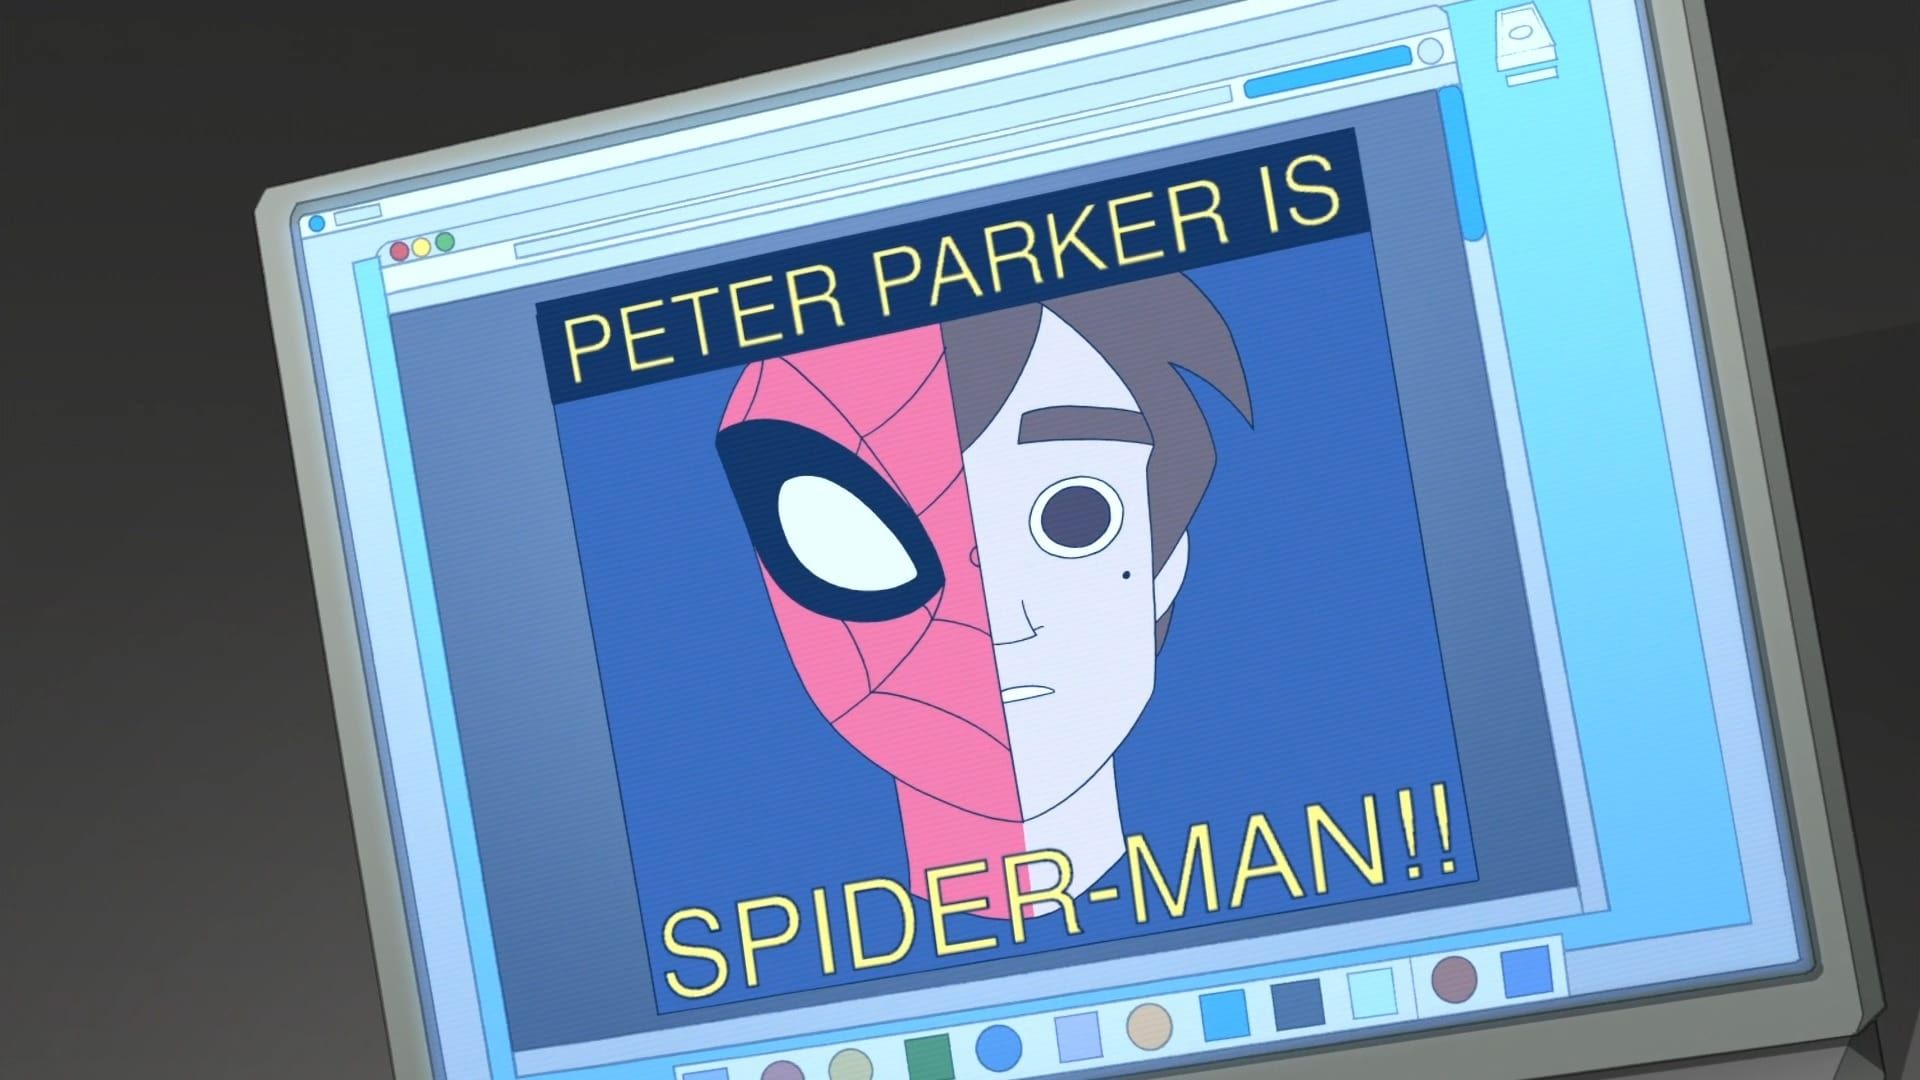 The Spectacular Spider-Man background